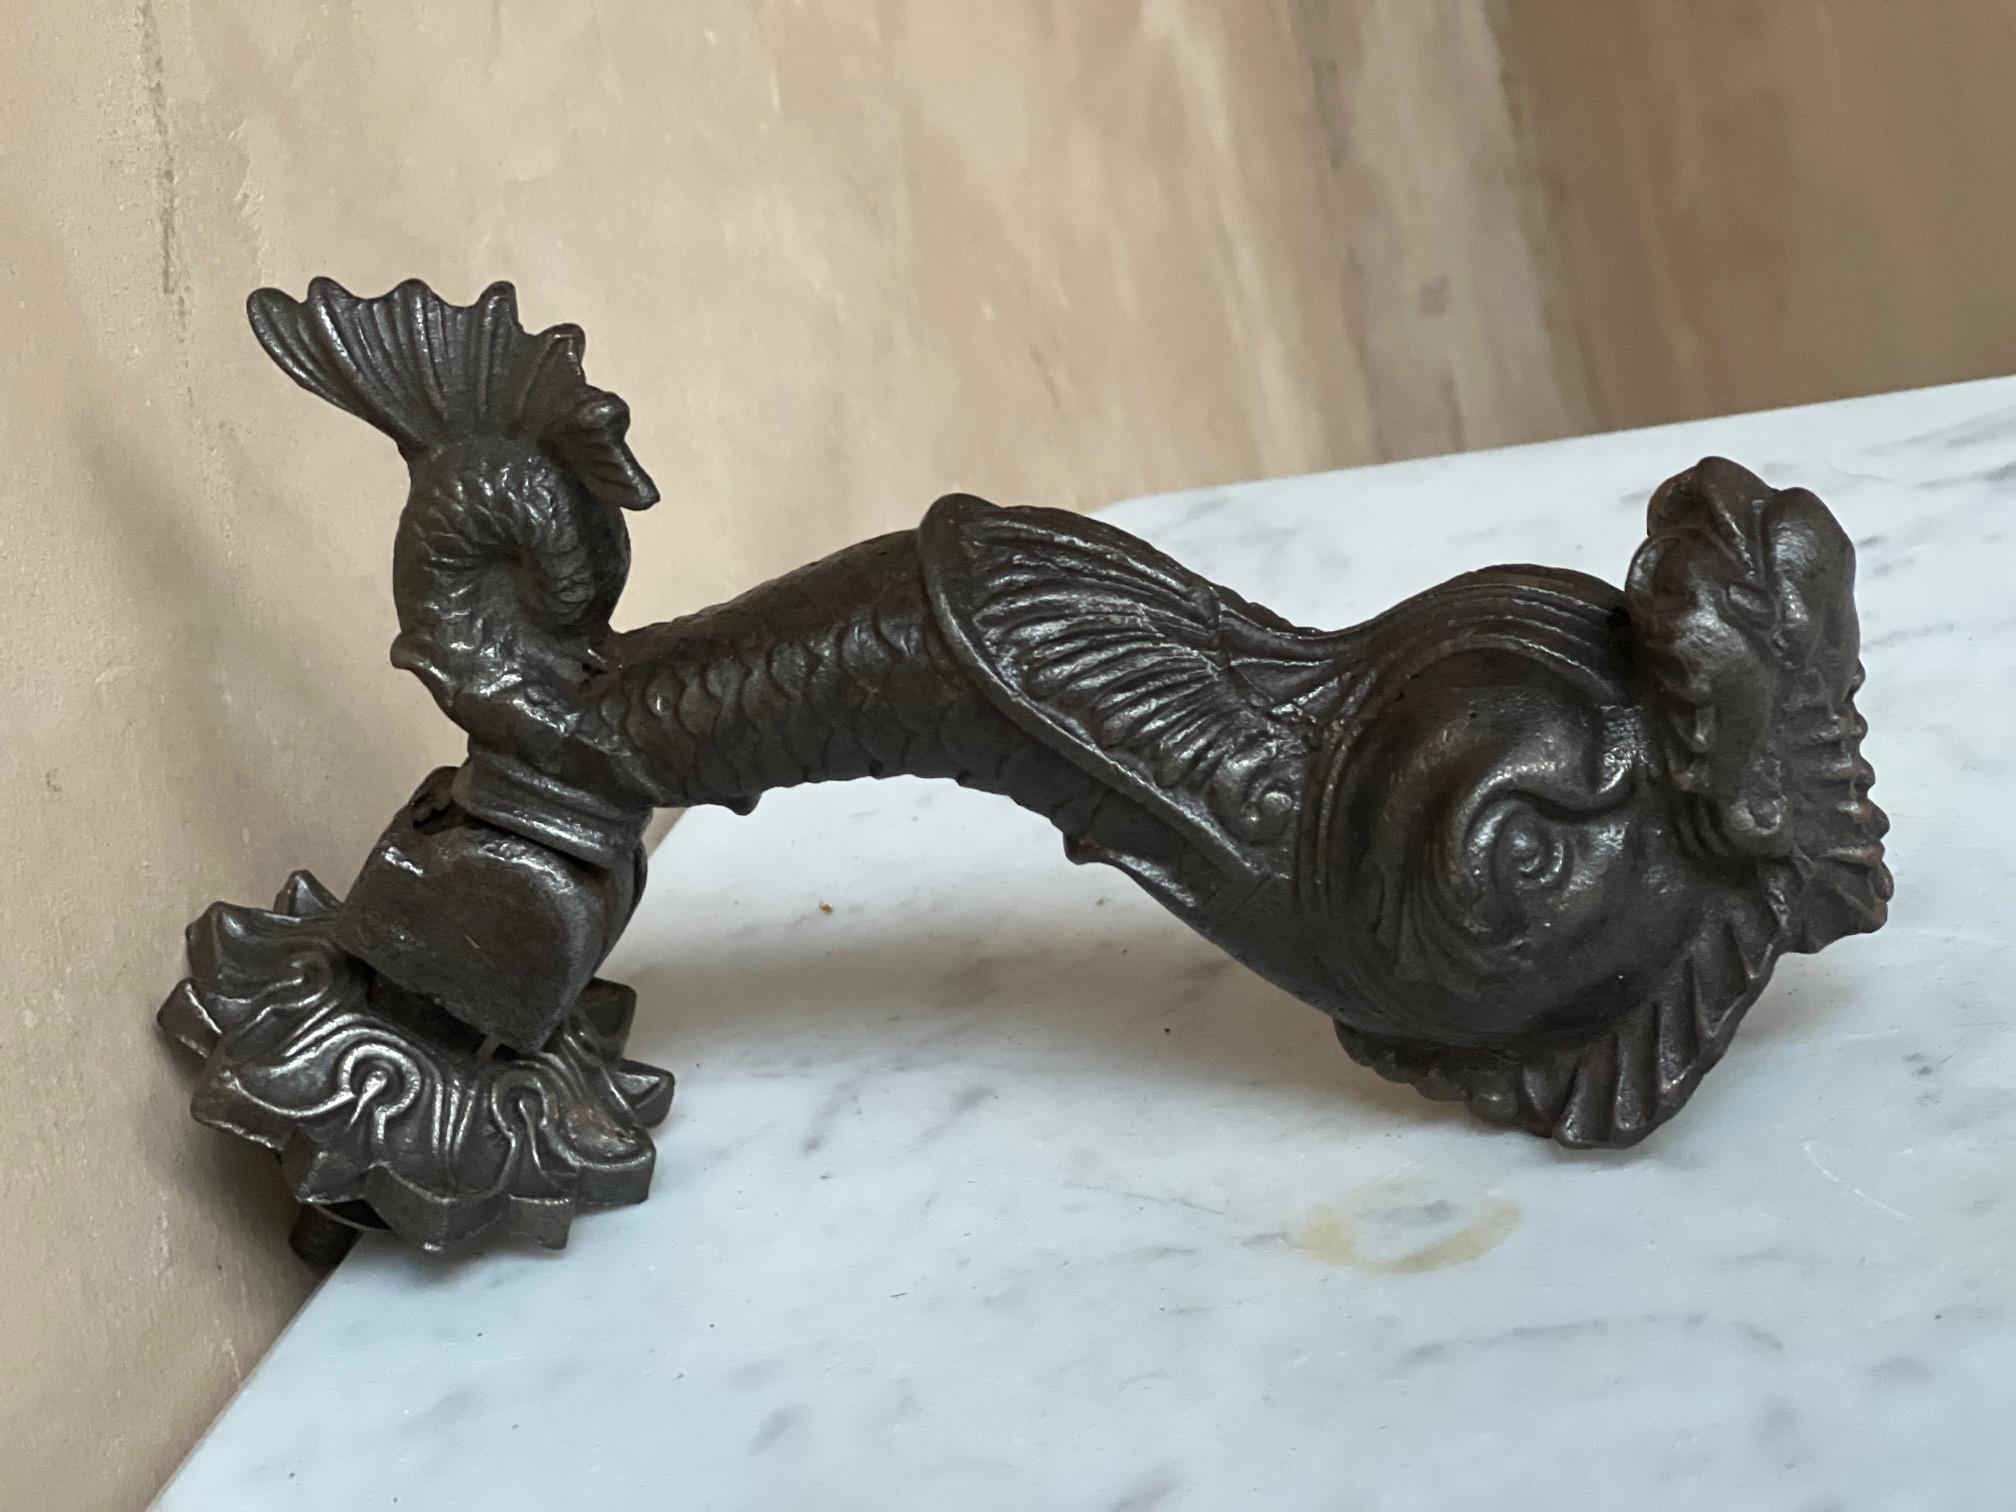 French cast iron door knocker from the late 19th century. The knocker is a figure of a mythological dolphin with a scales and a fan shaped tail.